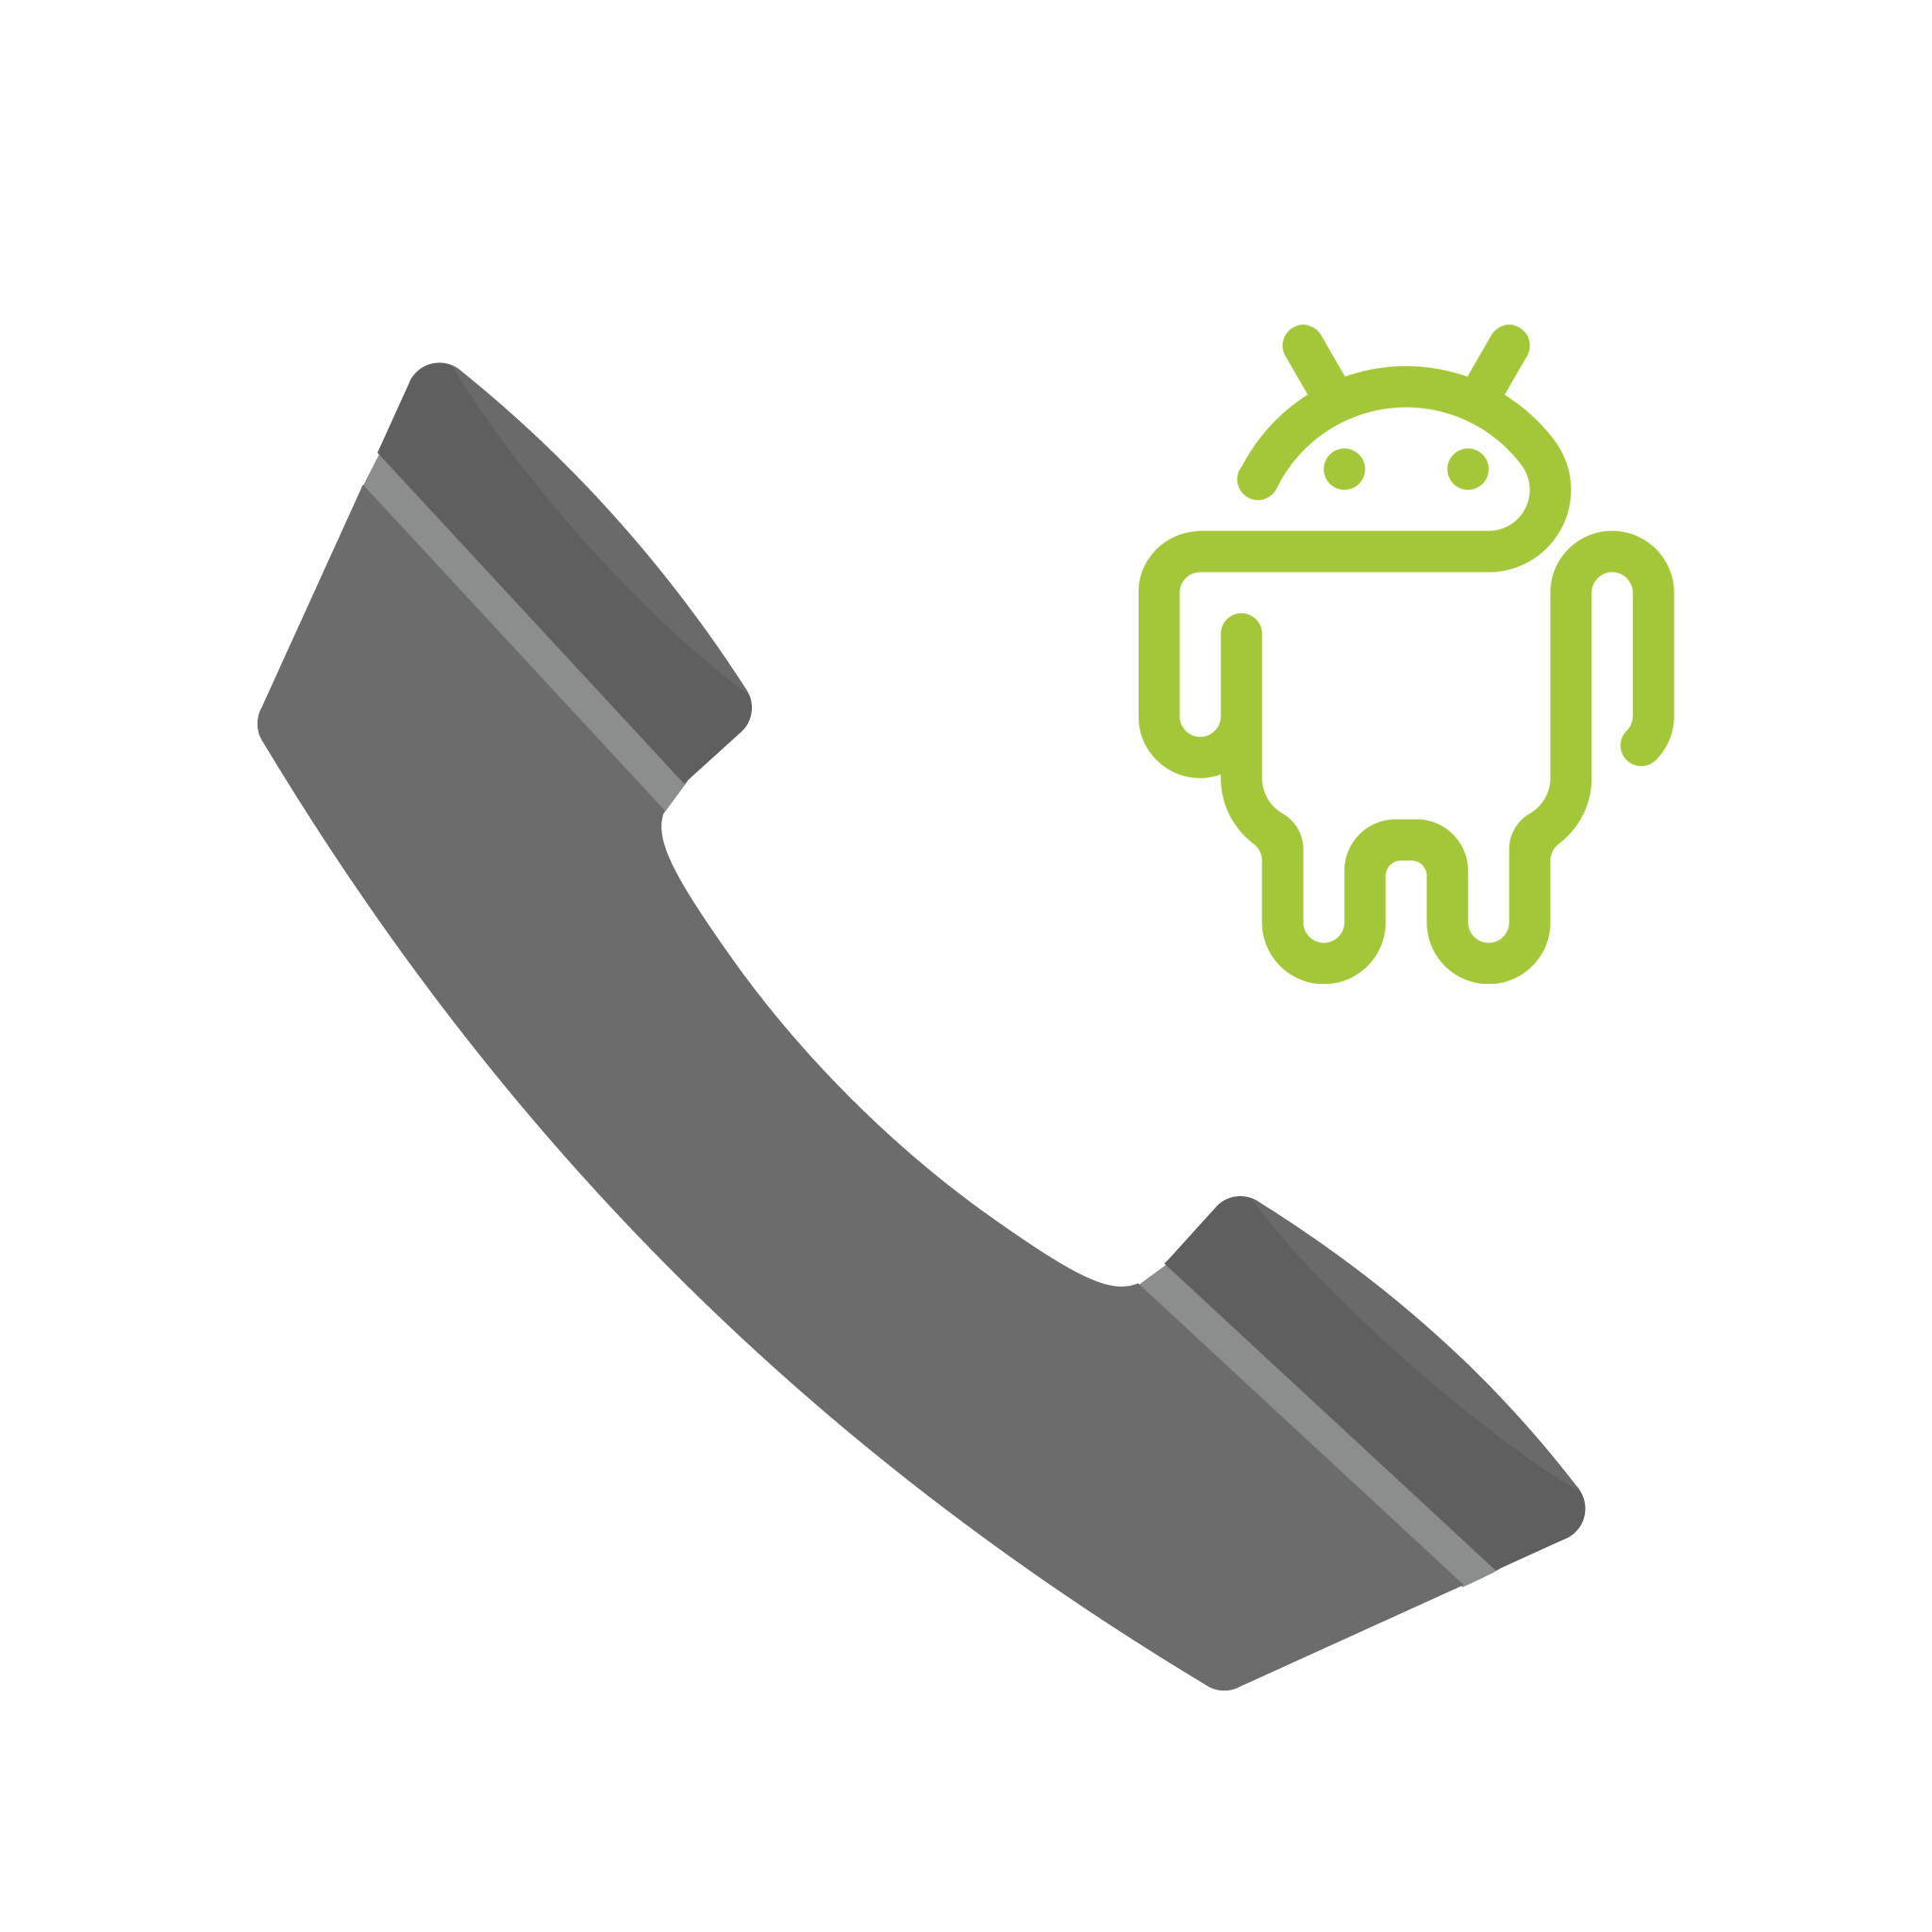 spam calls on android icon